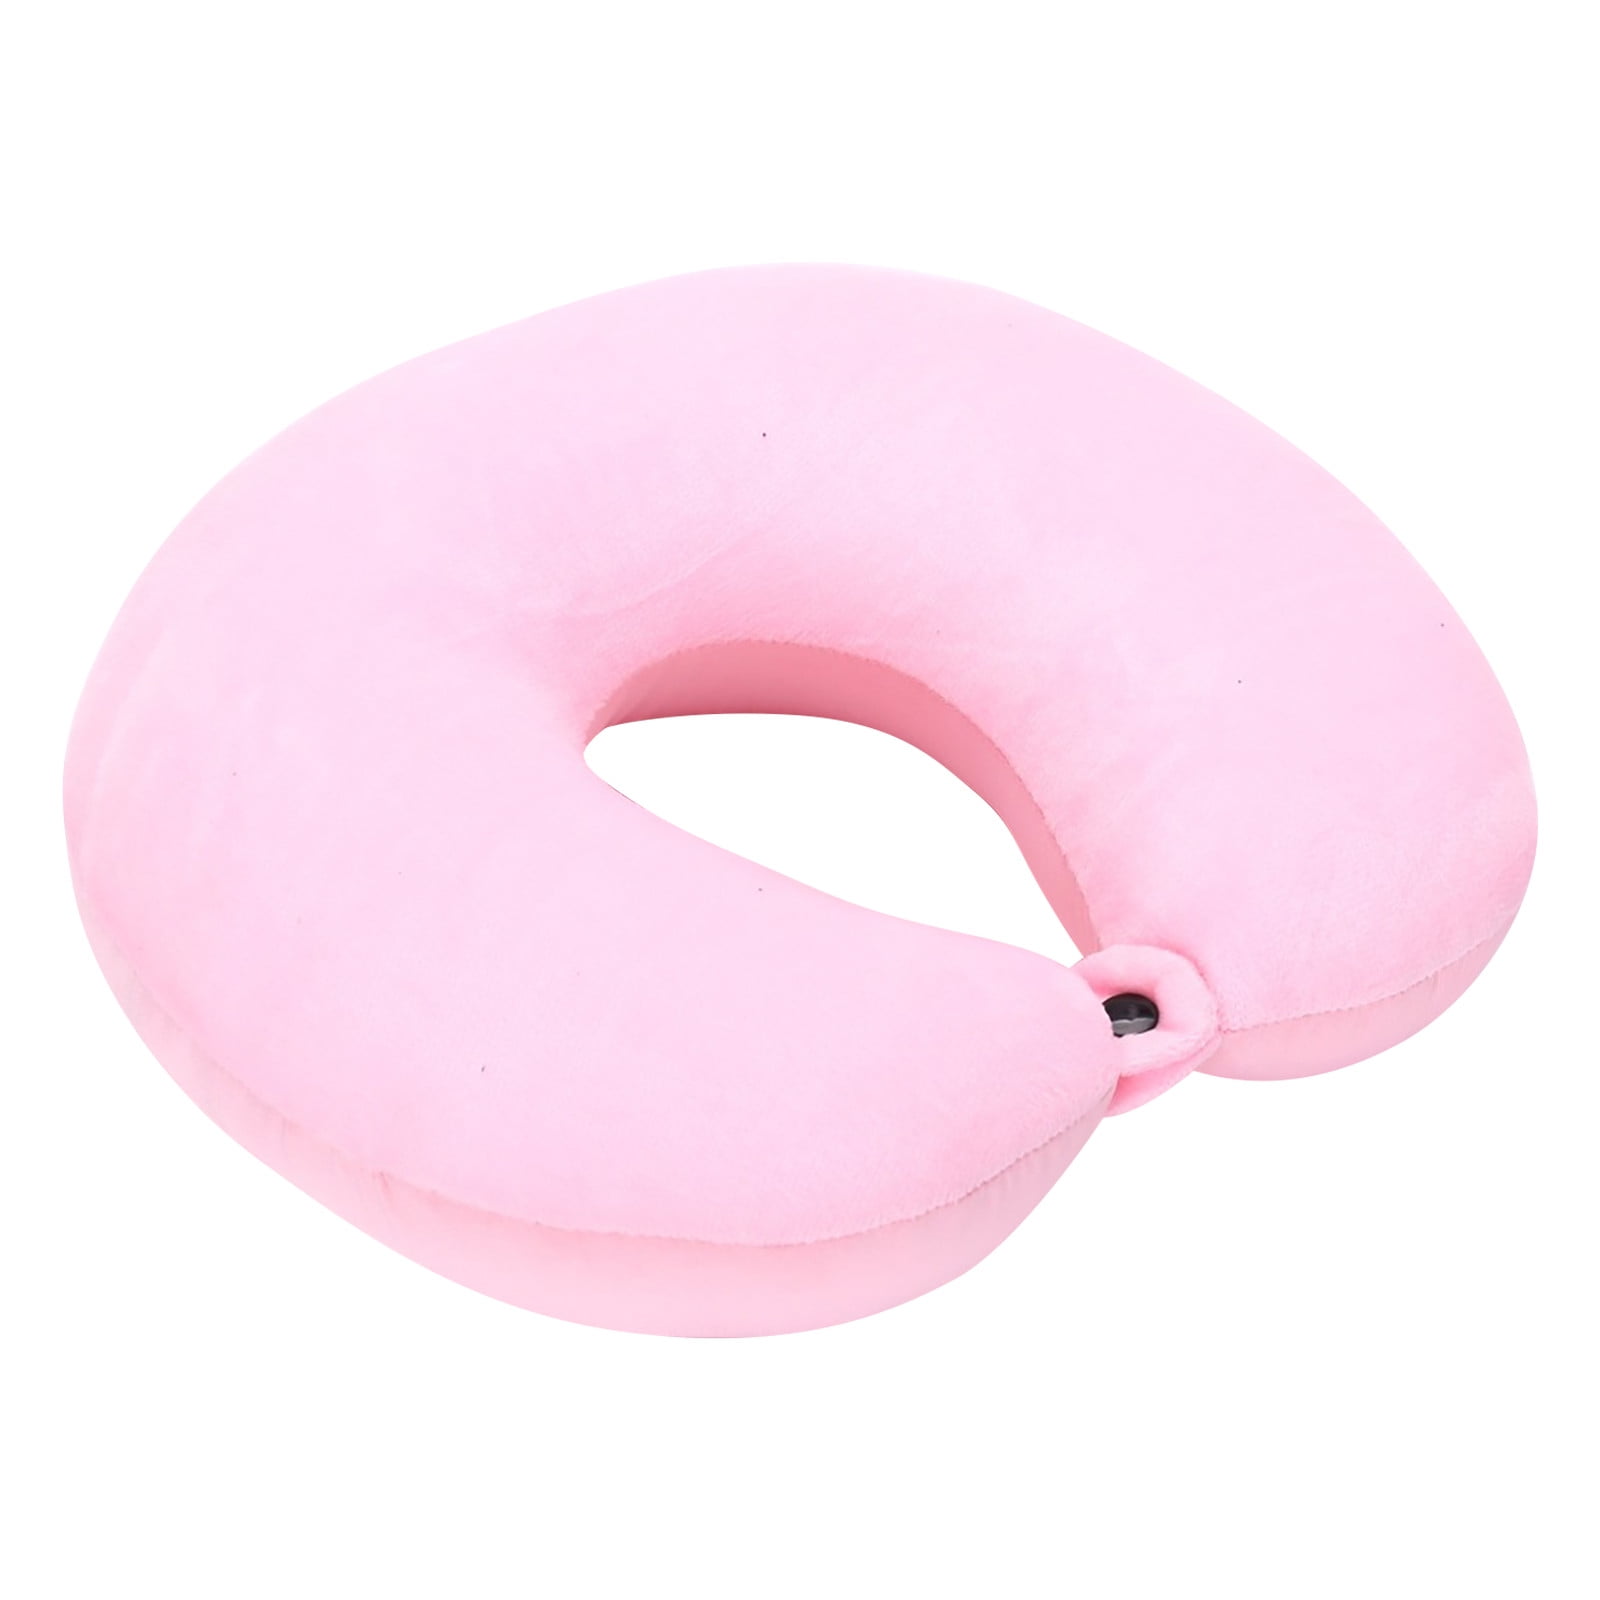 Noarlalf Body Pillow Case Air Cushion Self Inflating Button Travel Neck  Pillow Inflatable Plane Car Train Pillow Portable Soft U Shaped Travel  Pillow Flocking Fabric King Pillow Case 13*13*5 